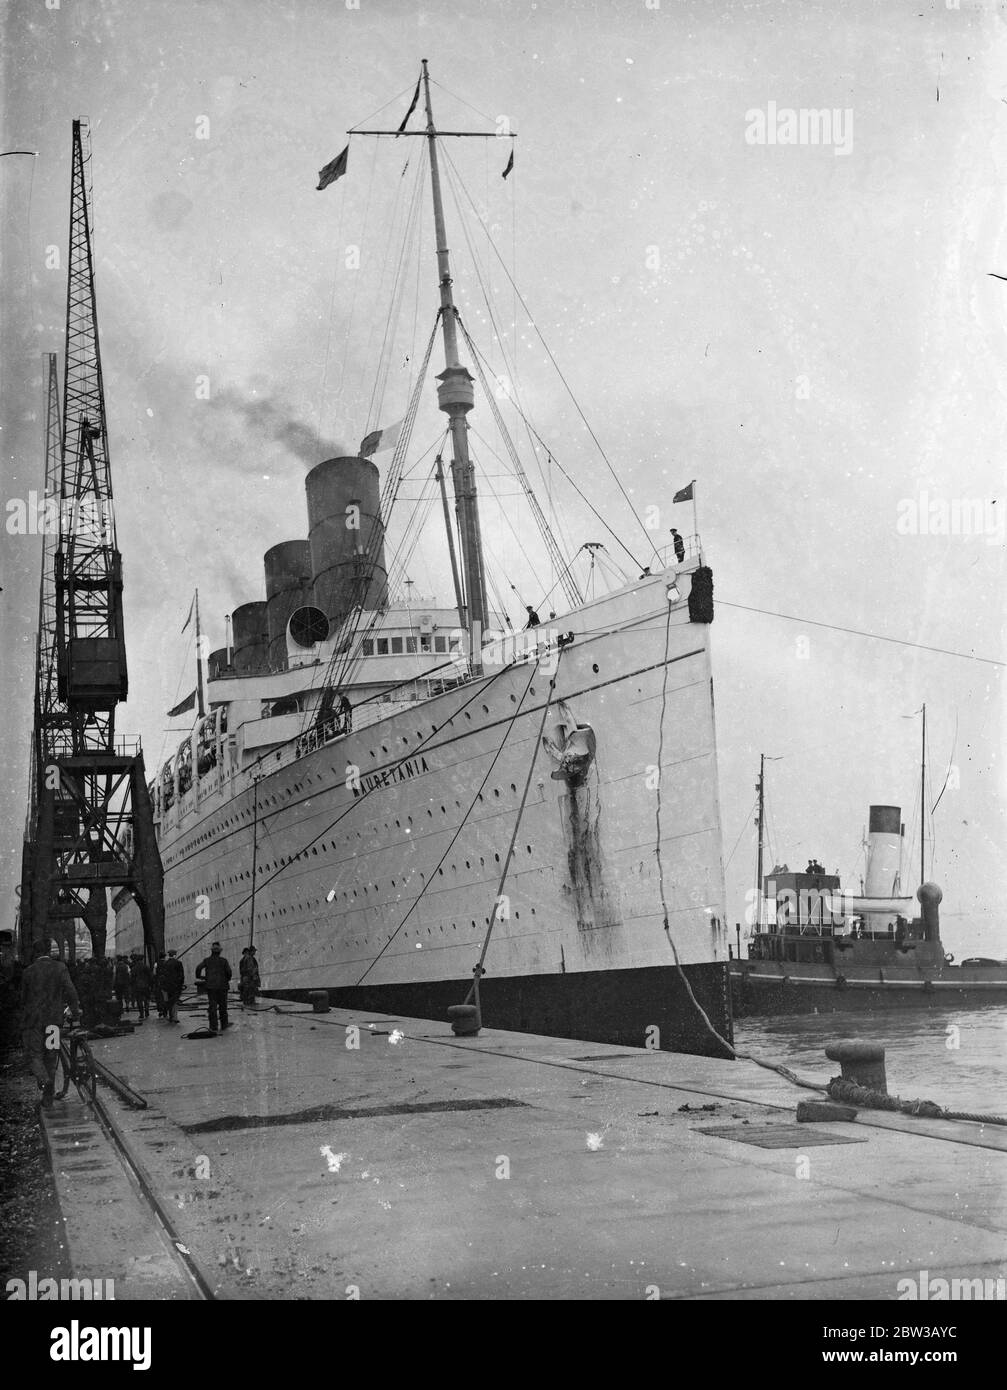 Mauretania to undergo refit not to be scrapped . Picture shows ship docked in port with tug boat alongside. 3 October 1934 Stock Photo